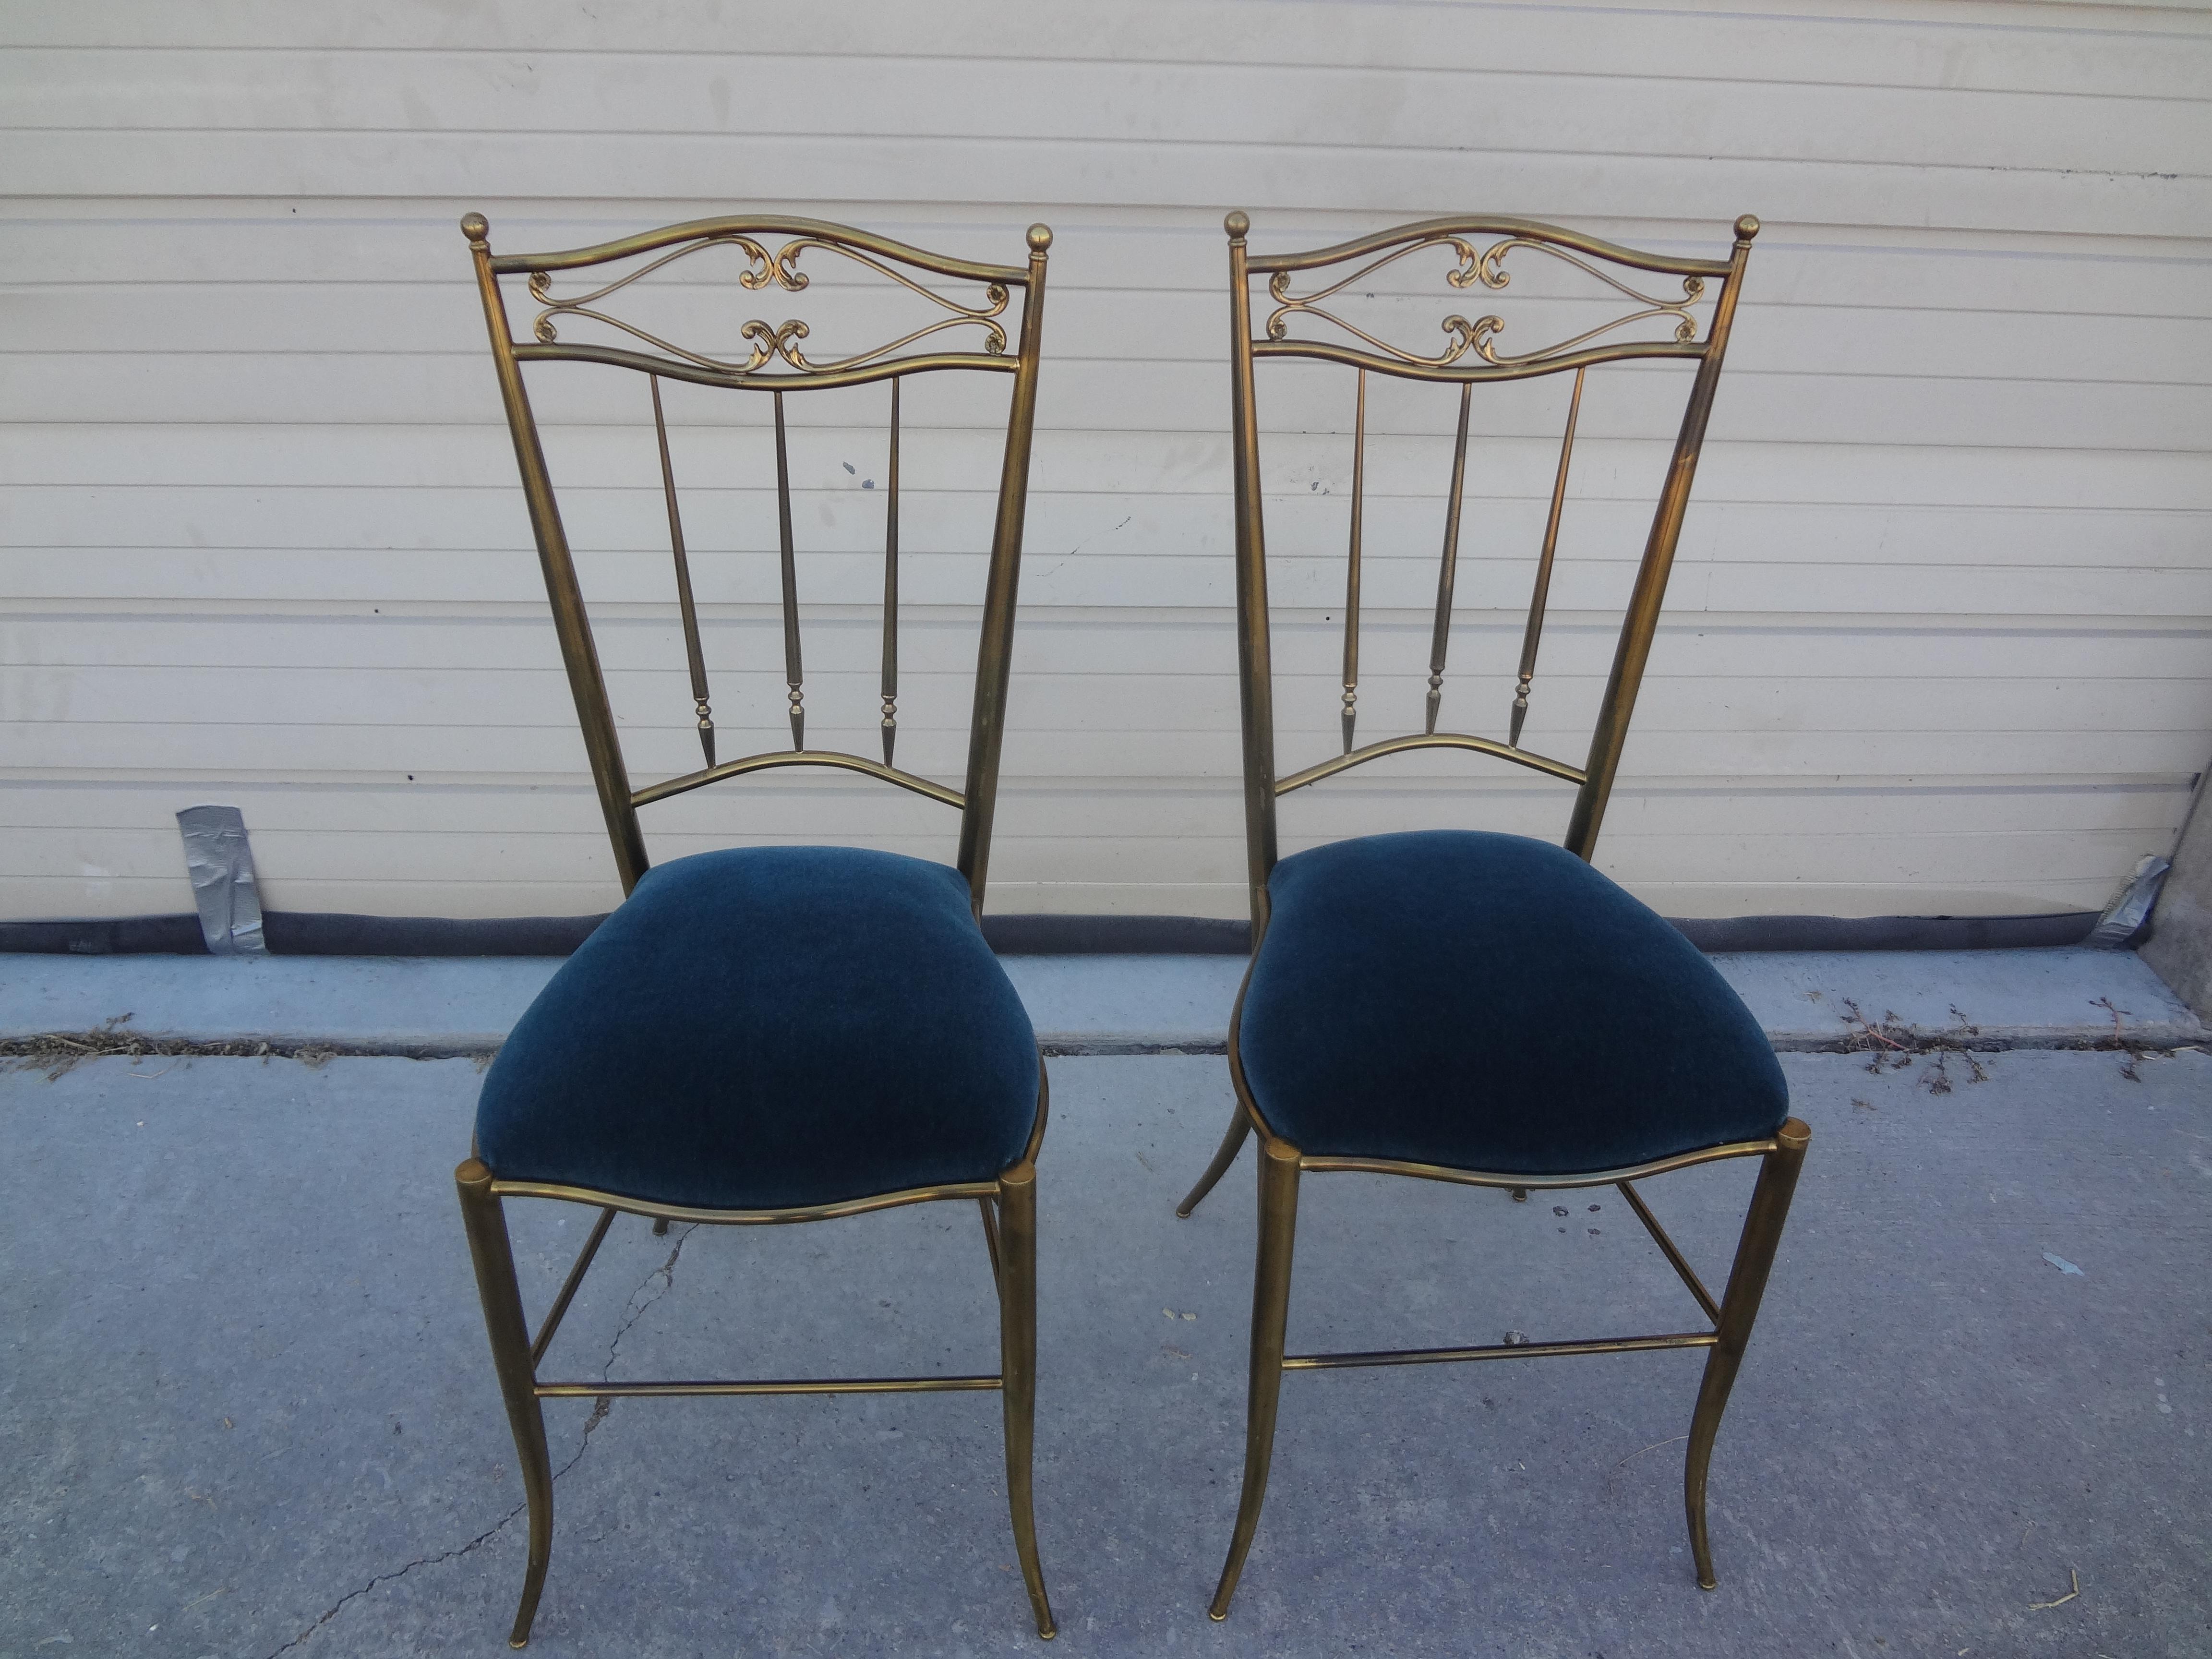 Pair of Italian Neoclassical style brass Chiavari side chairs. This stunning pair of vintage Italian Chiavari chairs are newly upholstered in a lovely shade of blue mohair. Perfect flanking a console table, commode or buffet. Great for extra seating